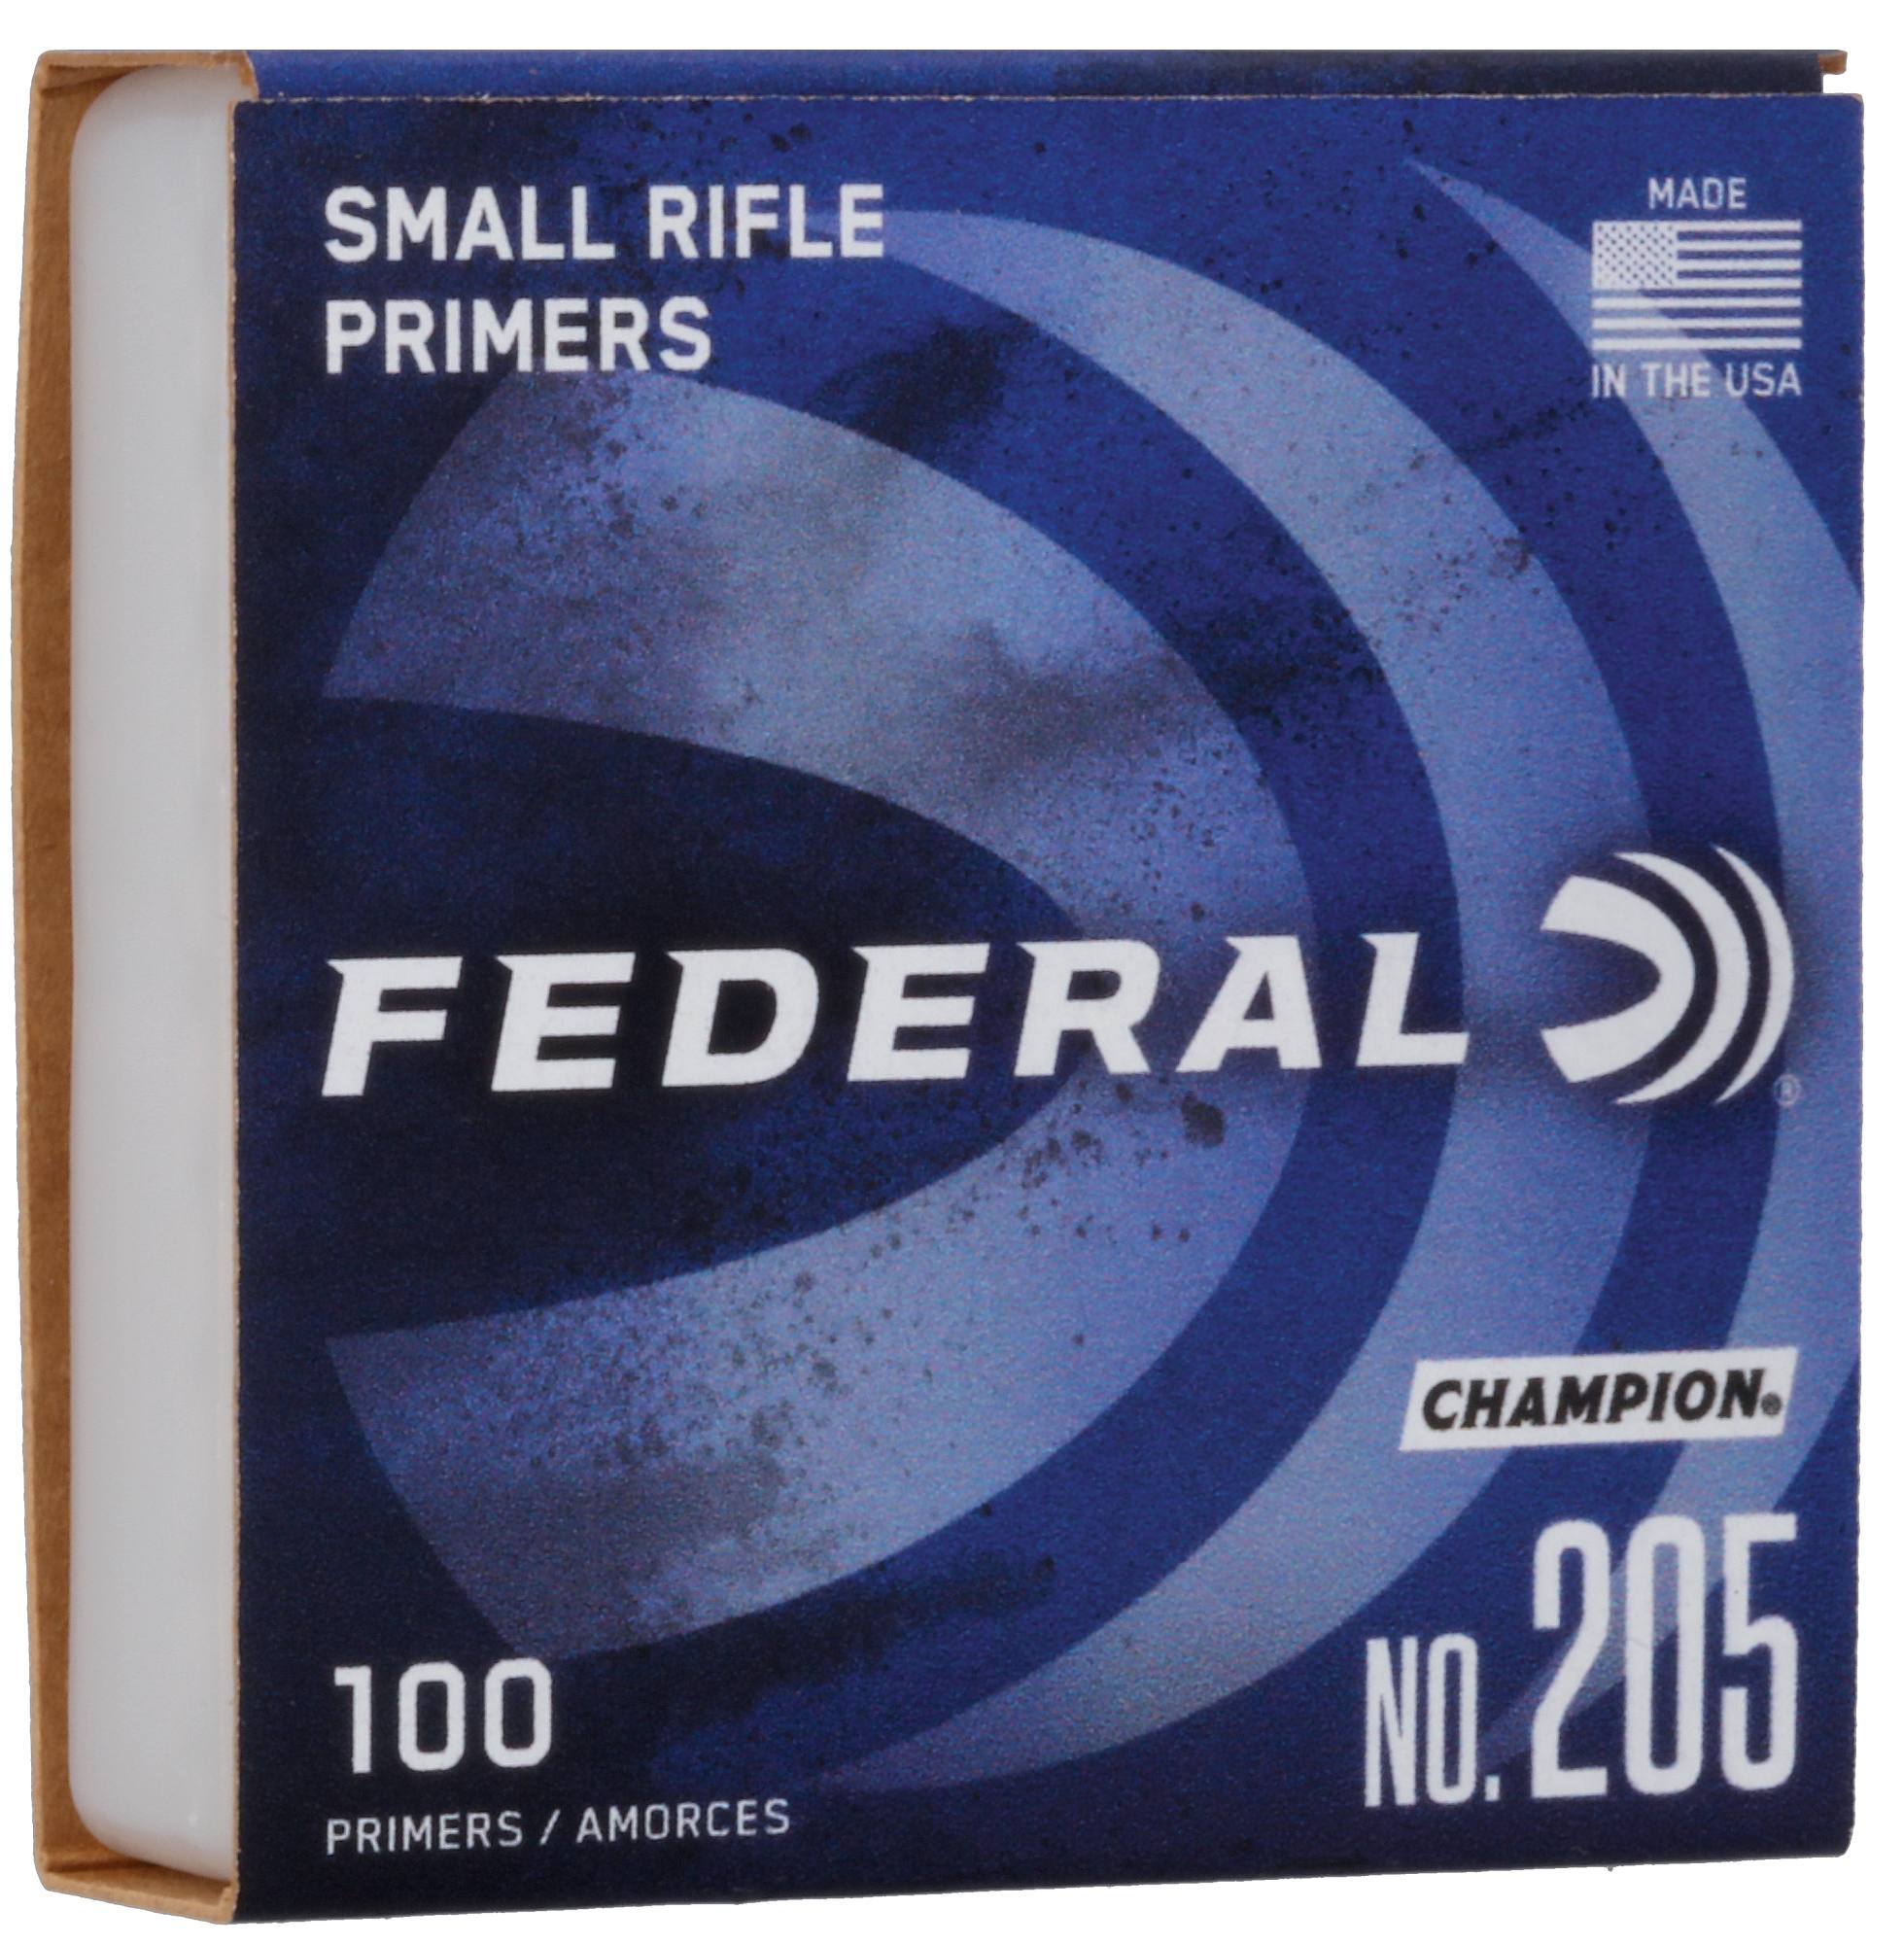 Federal small rifle primers #205